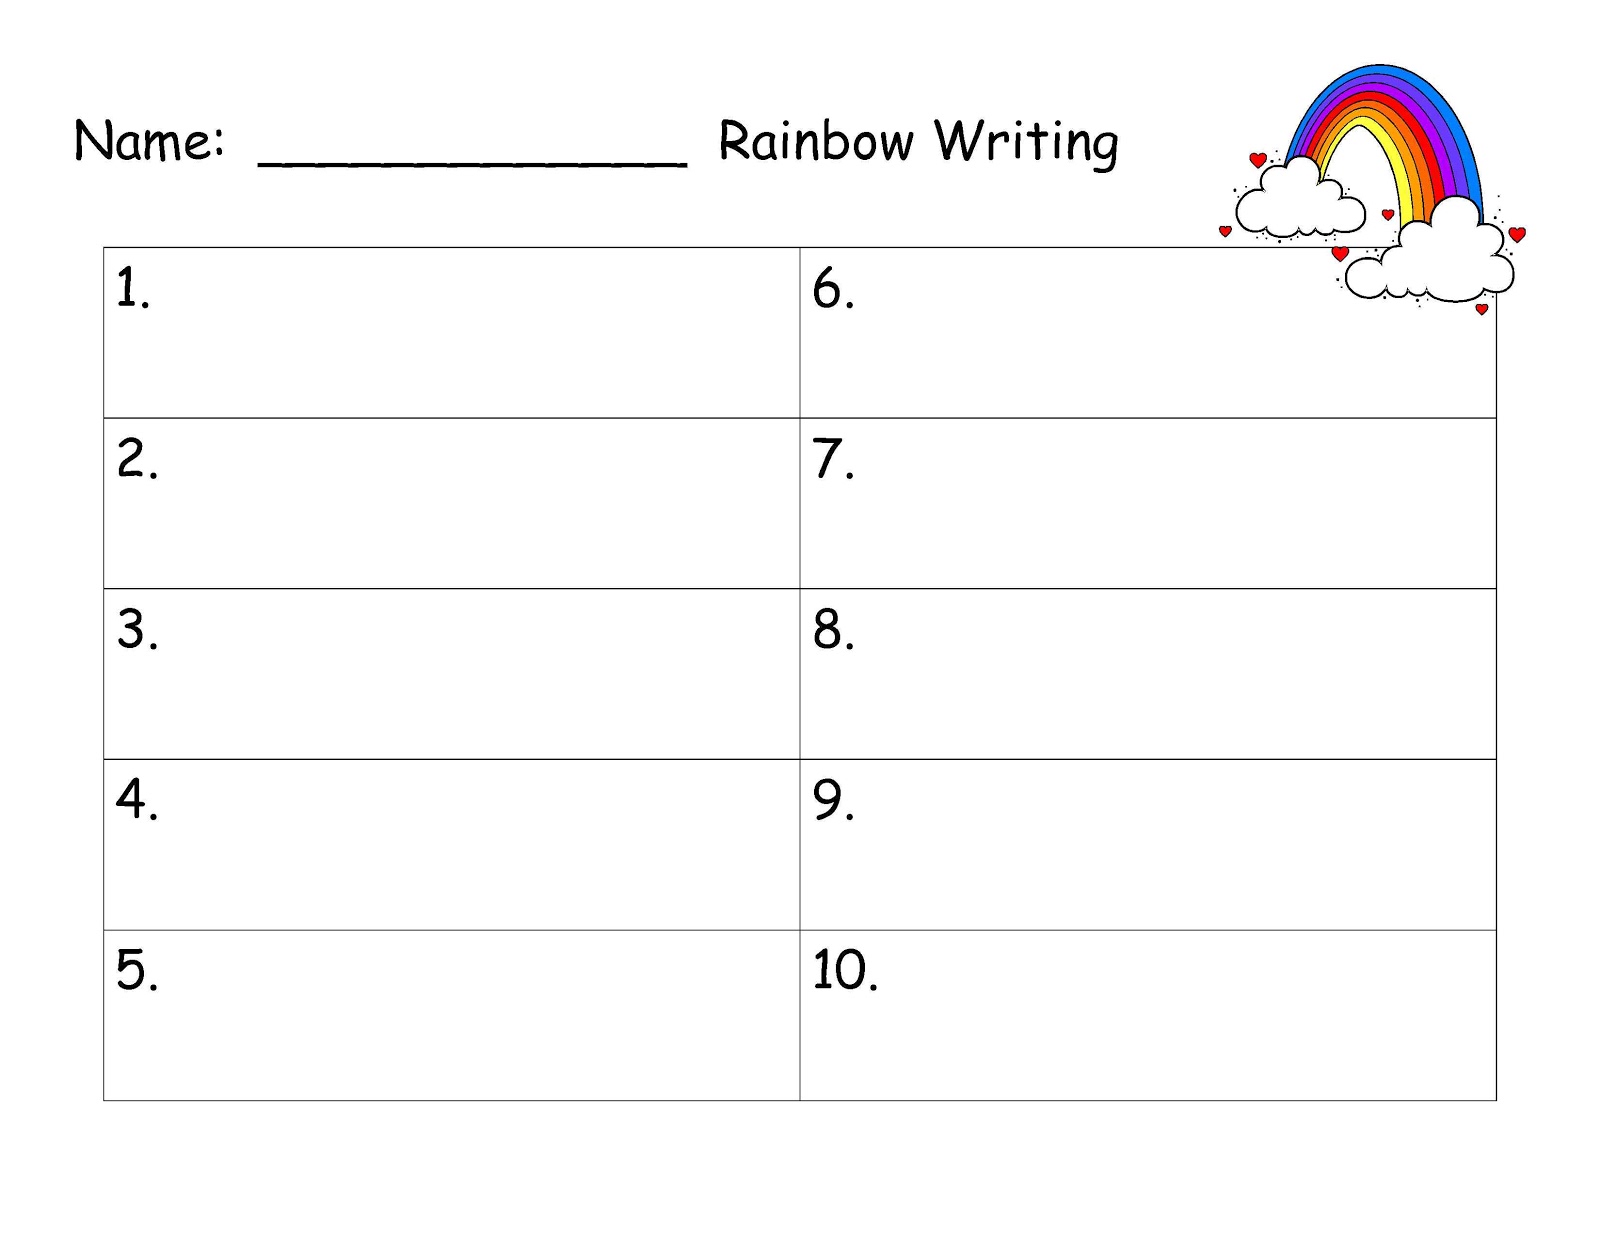 5-best-images-of-rainbow-writing-paper-printable-rainbow-writing